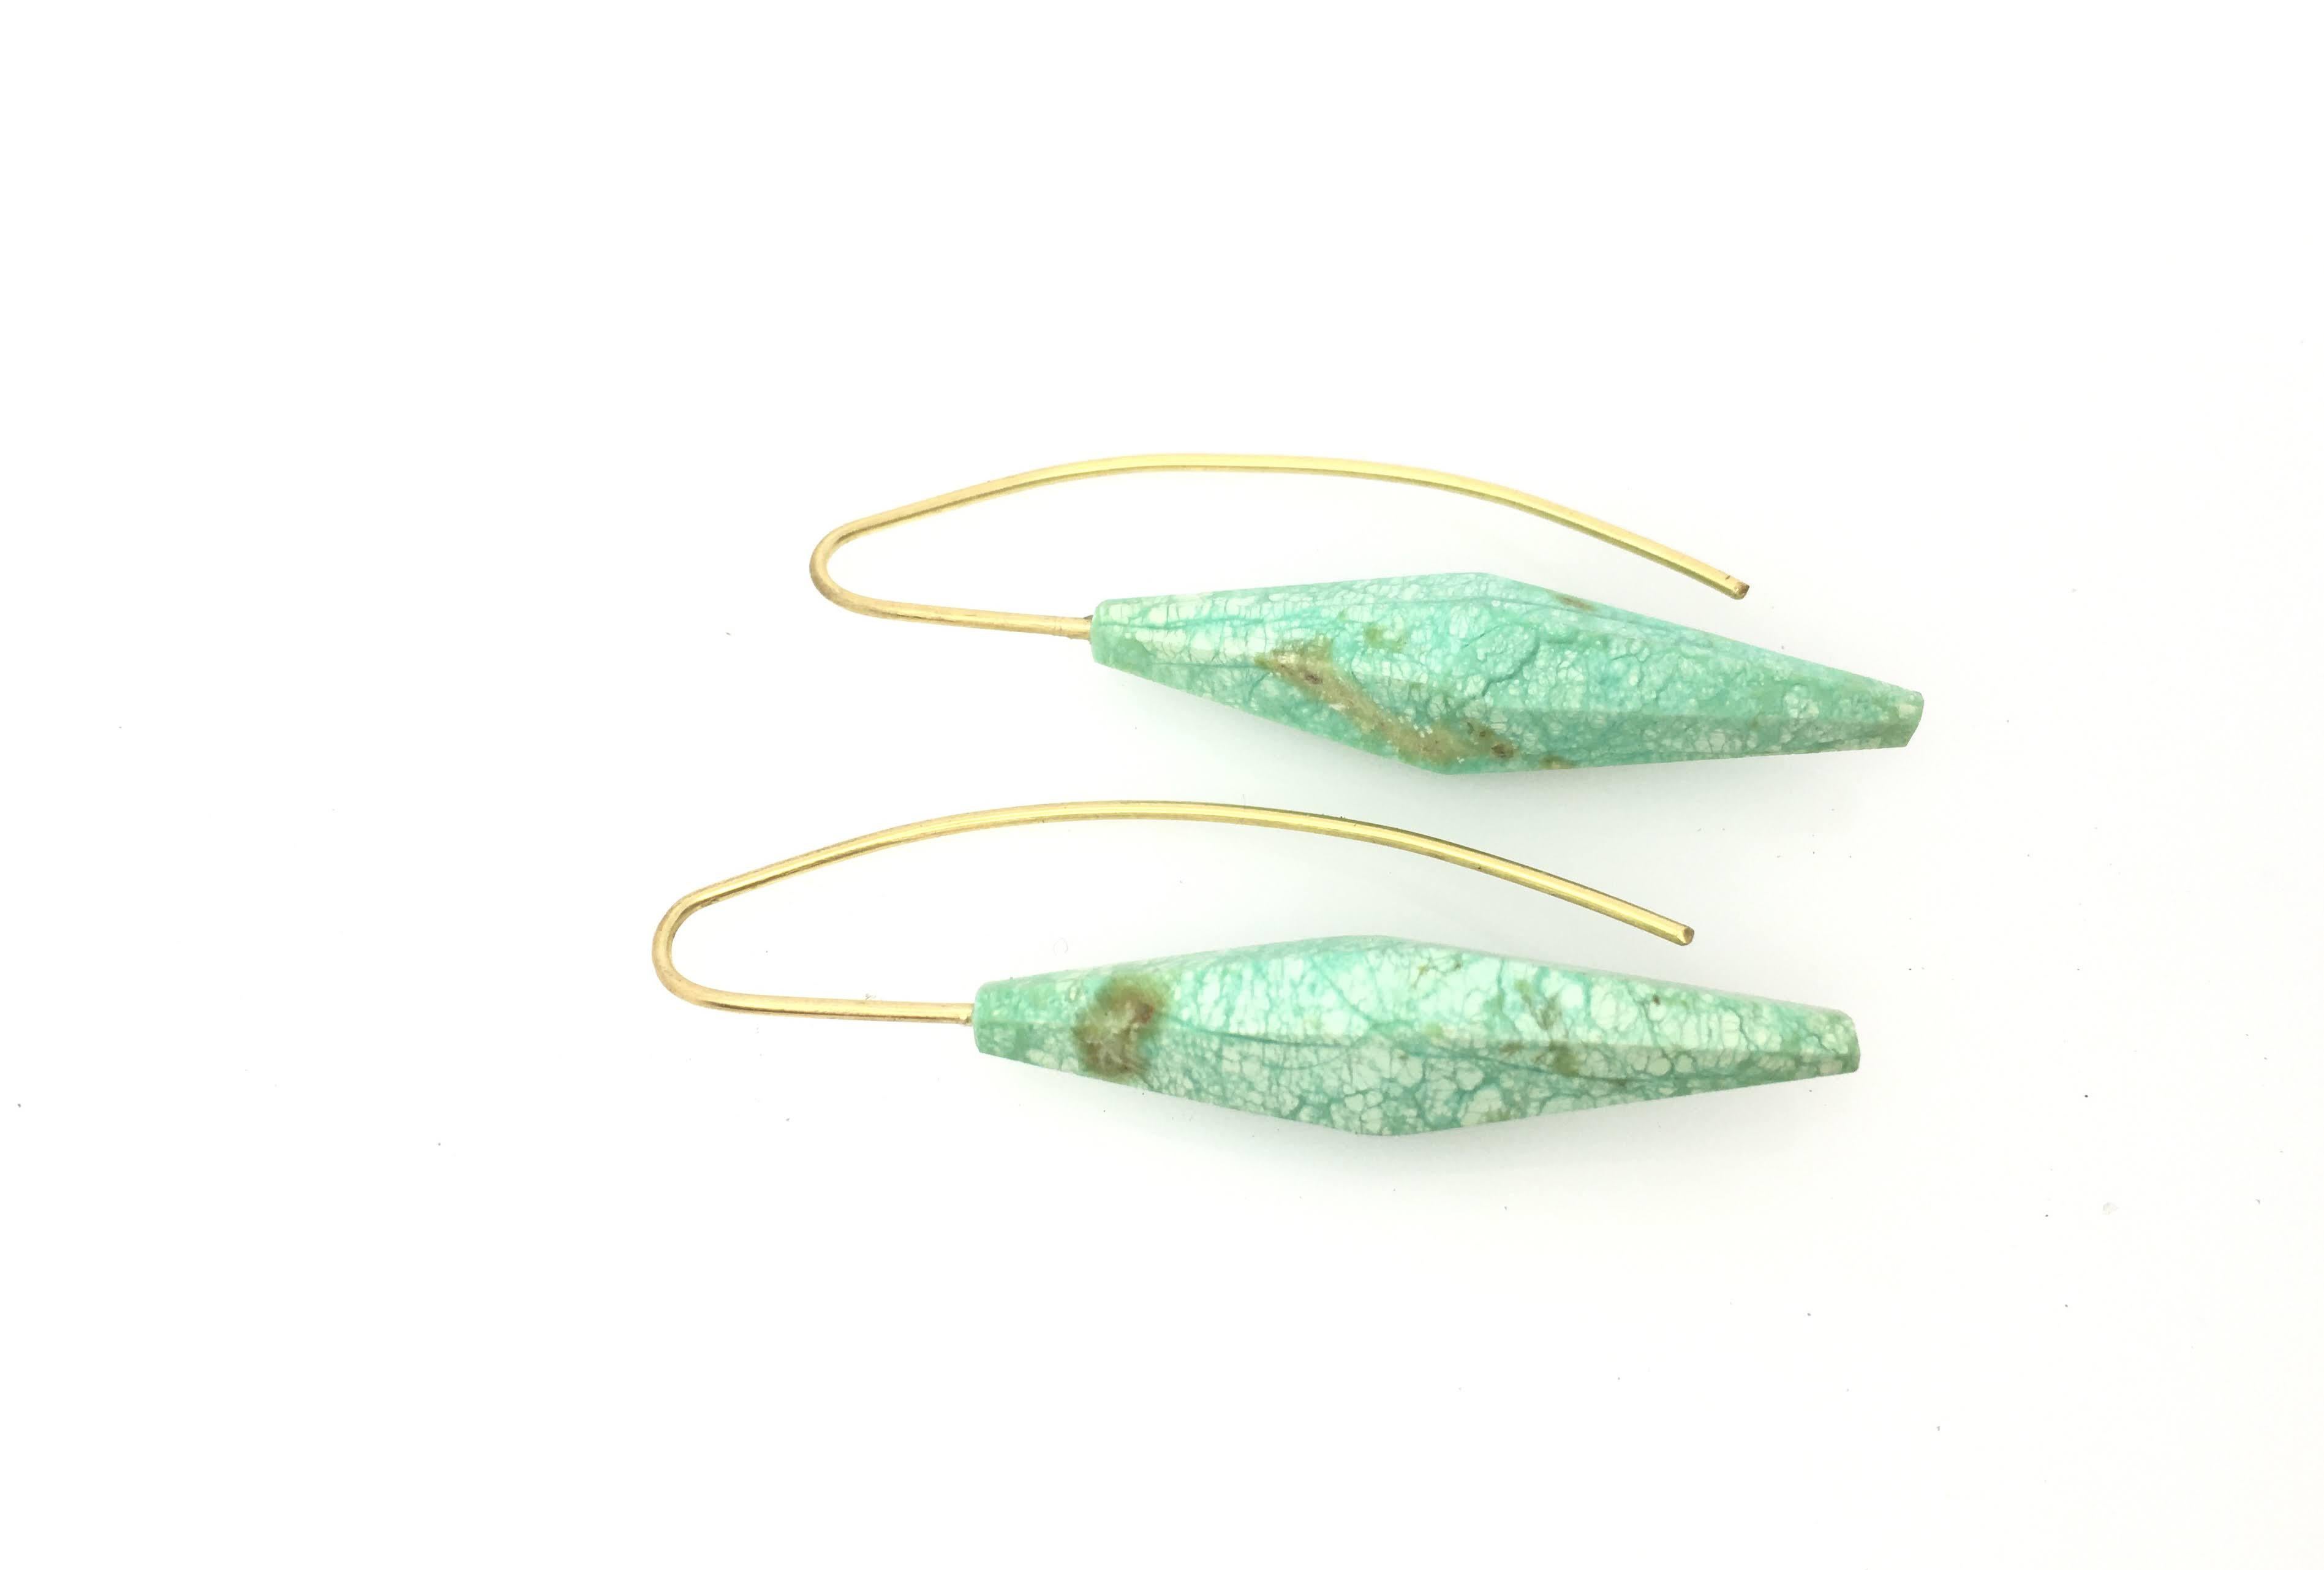 One-of-a-kind Chrysoprase tapered and faceted drops on 18k yellow gold wire earrings. 1.9 inches long .33 inches wide. This chic minimal design adds a perfect, playful pop of color for any skin tone or hair length.


About Claudia Endler